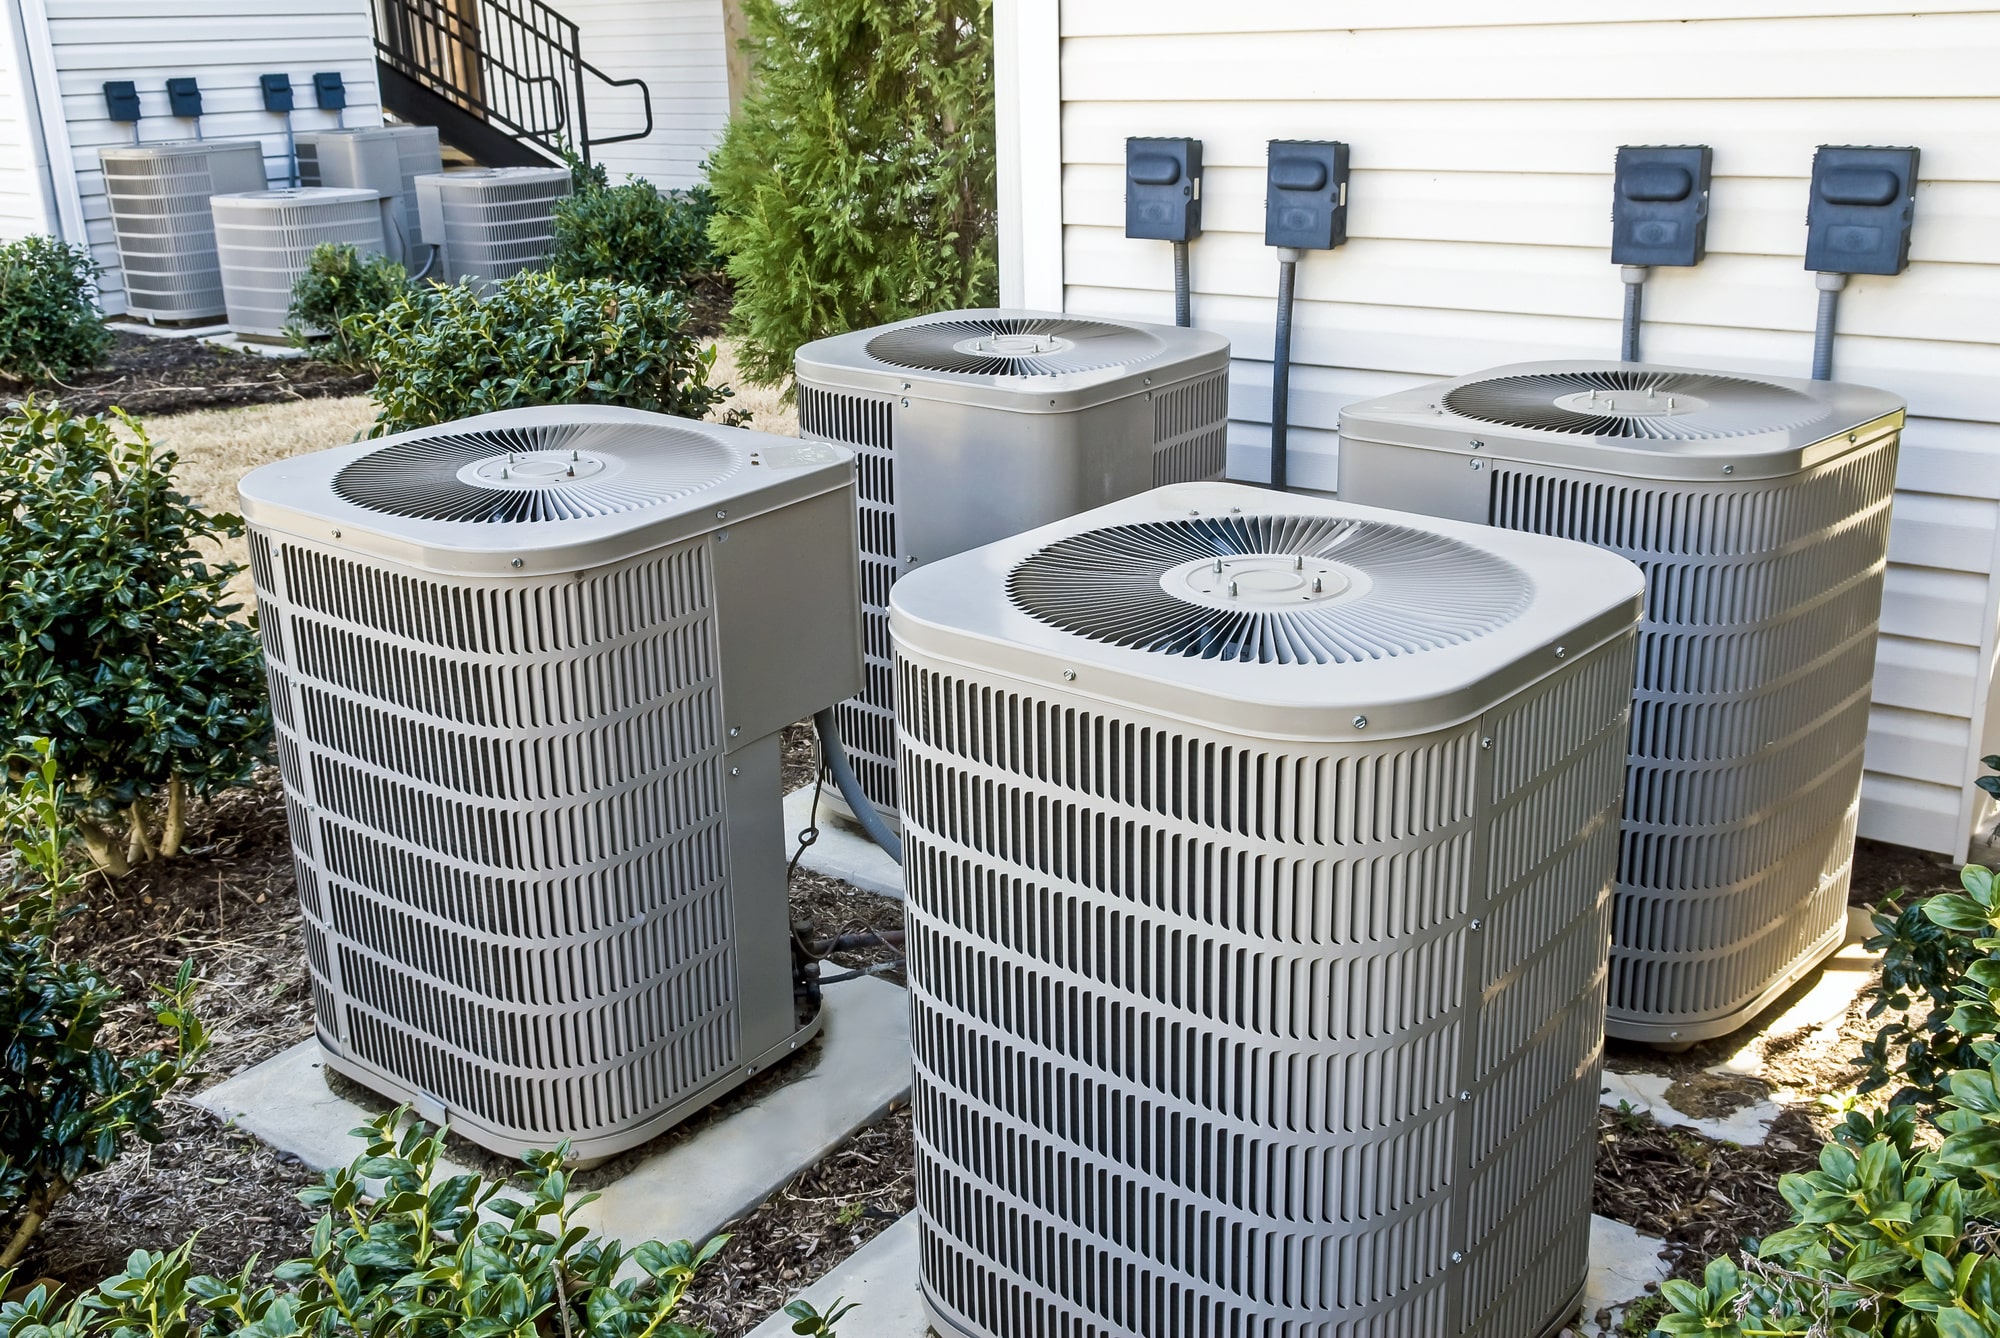 7 Questions to Ask Your Potential HVAC Contractor